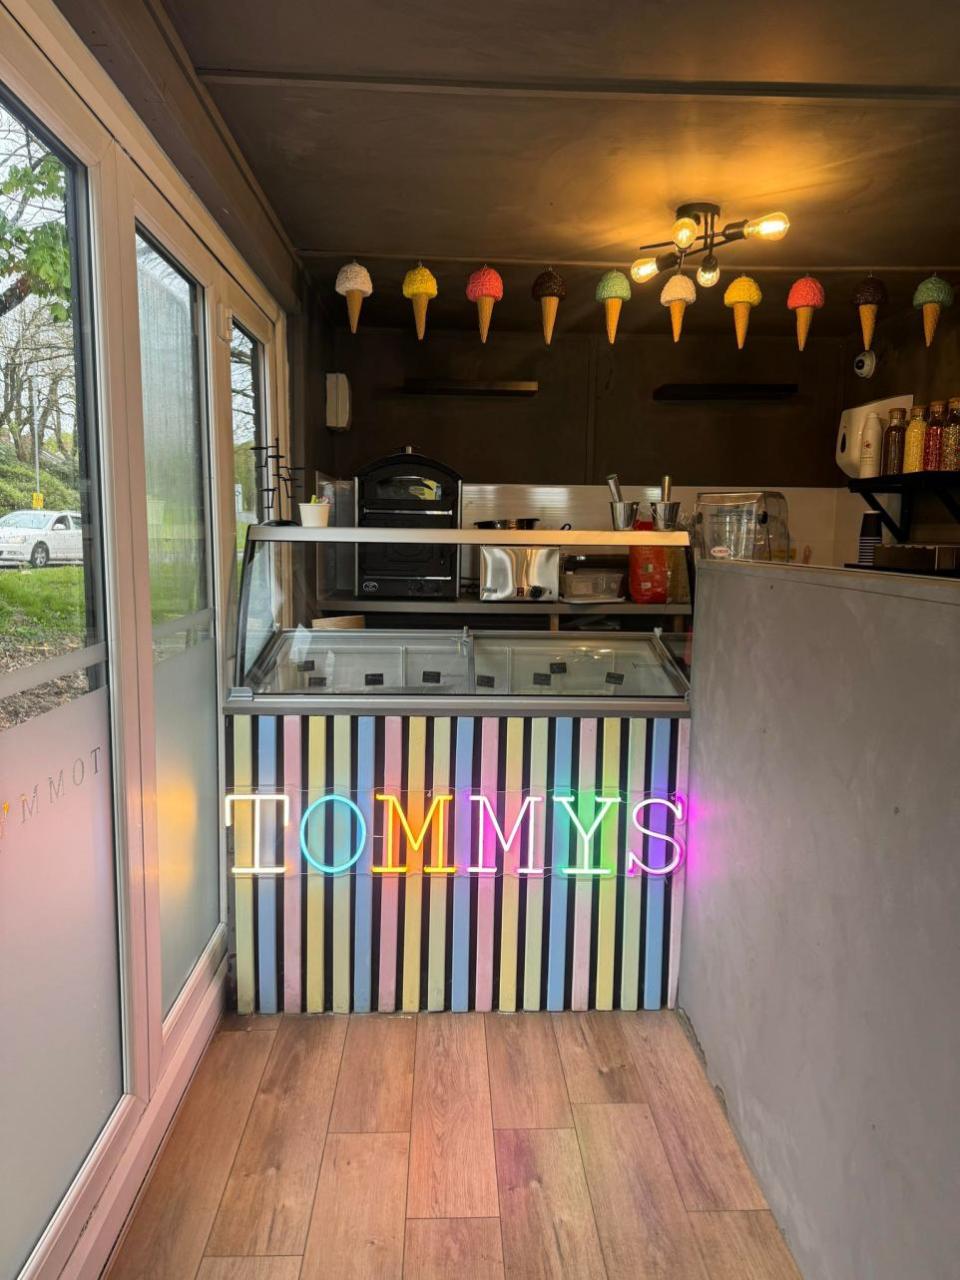 South Wales Argus: The beautiful ice cream counter